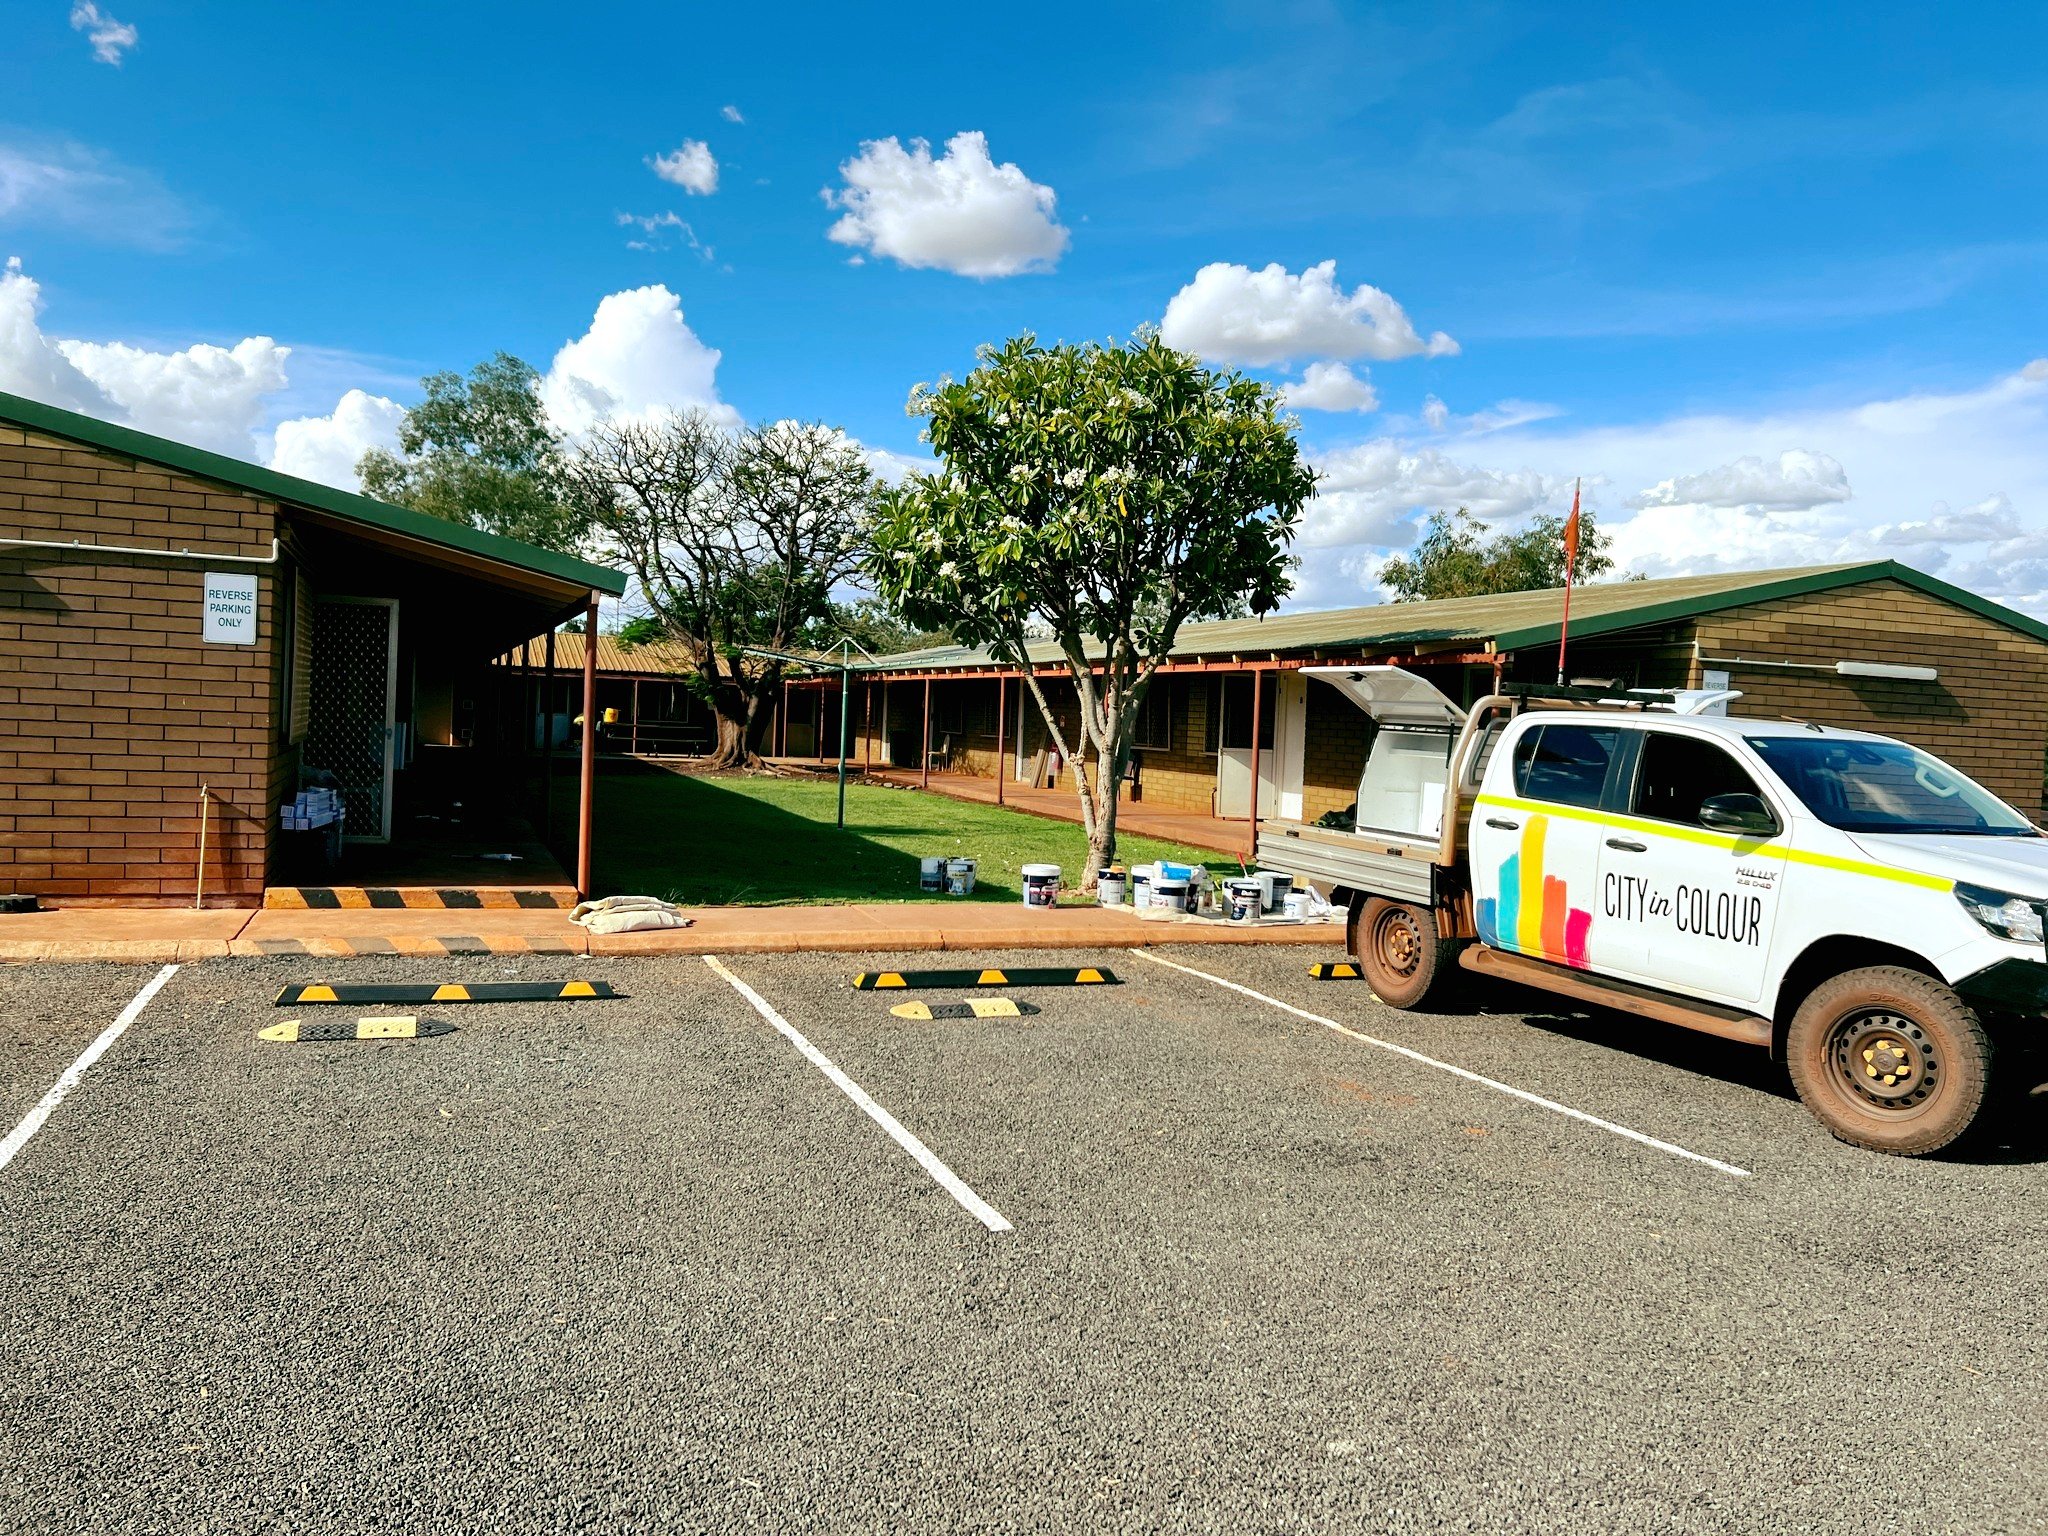 City in Colour provide specialised remote and mining painting &amp; labour hire services ✅ 

We have a number of our painters regularly based in Newman, with the skill and experience to adhere to on-site processes, systems and HSE protocols. 

#cityi